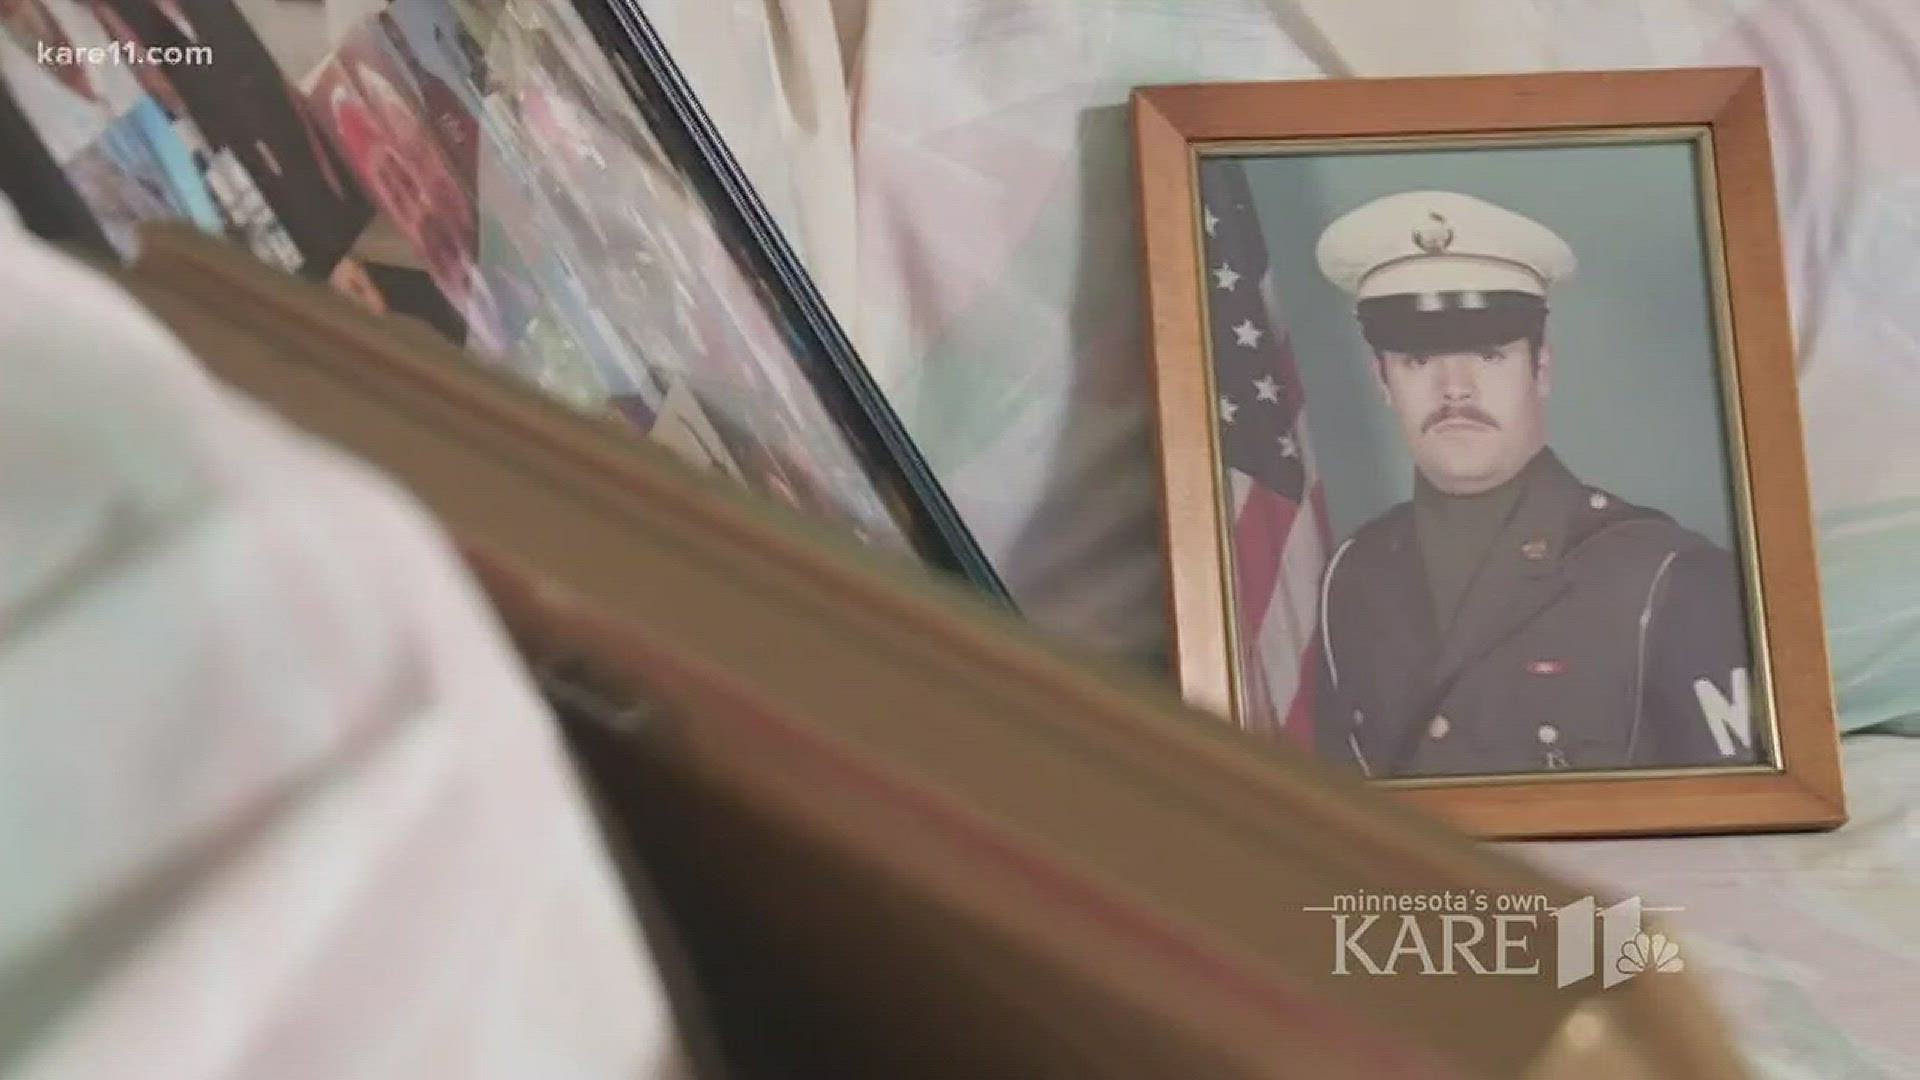 The U.S. House passed a bill Tuesday allowing the Department of Veterans Affairs to pay for transplants done at non-VA hospitals rather than forcing veterans to travel cross-country to a VA facility. http://kare11.tv/2zqvqHe